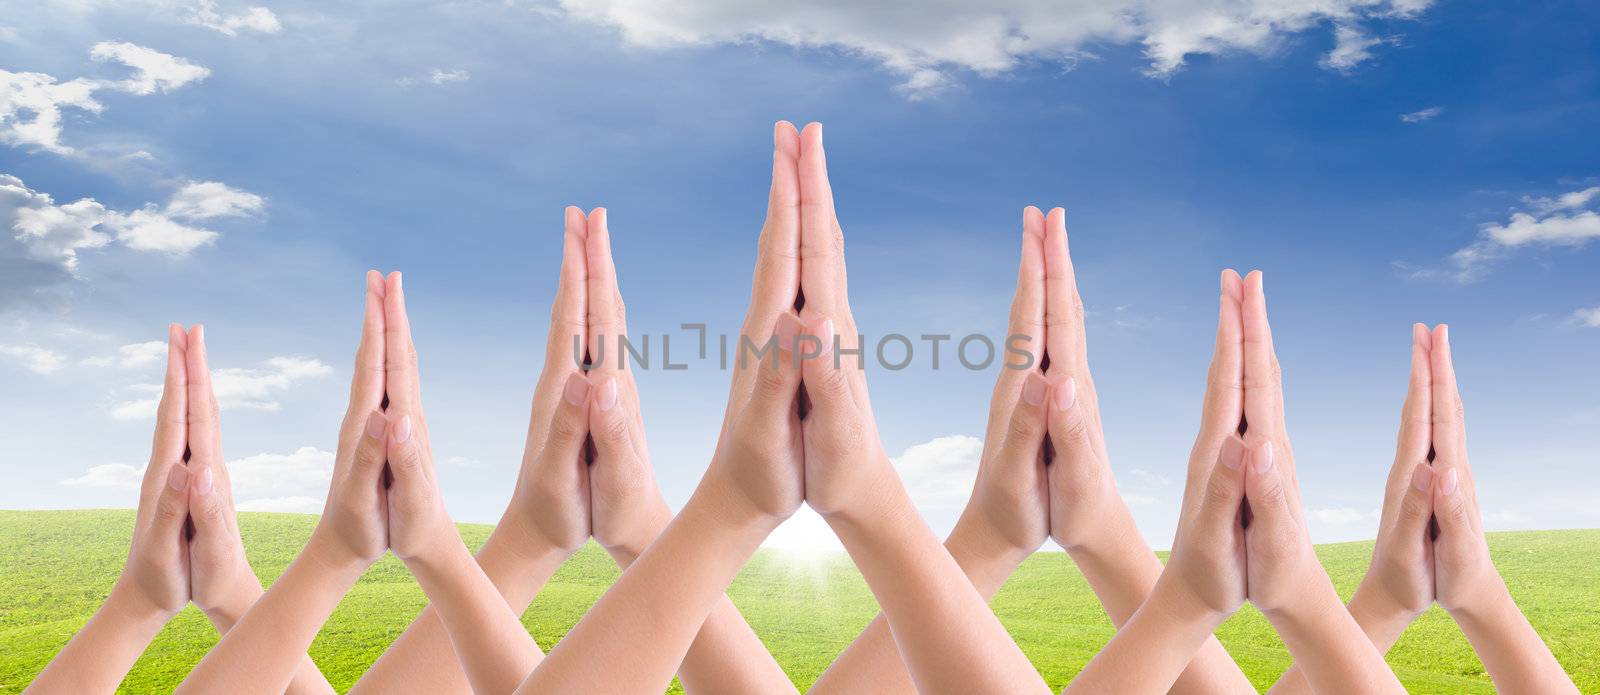 put hands together in salute by tungphoto